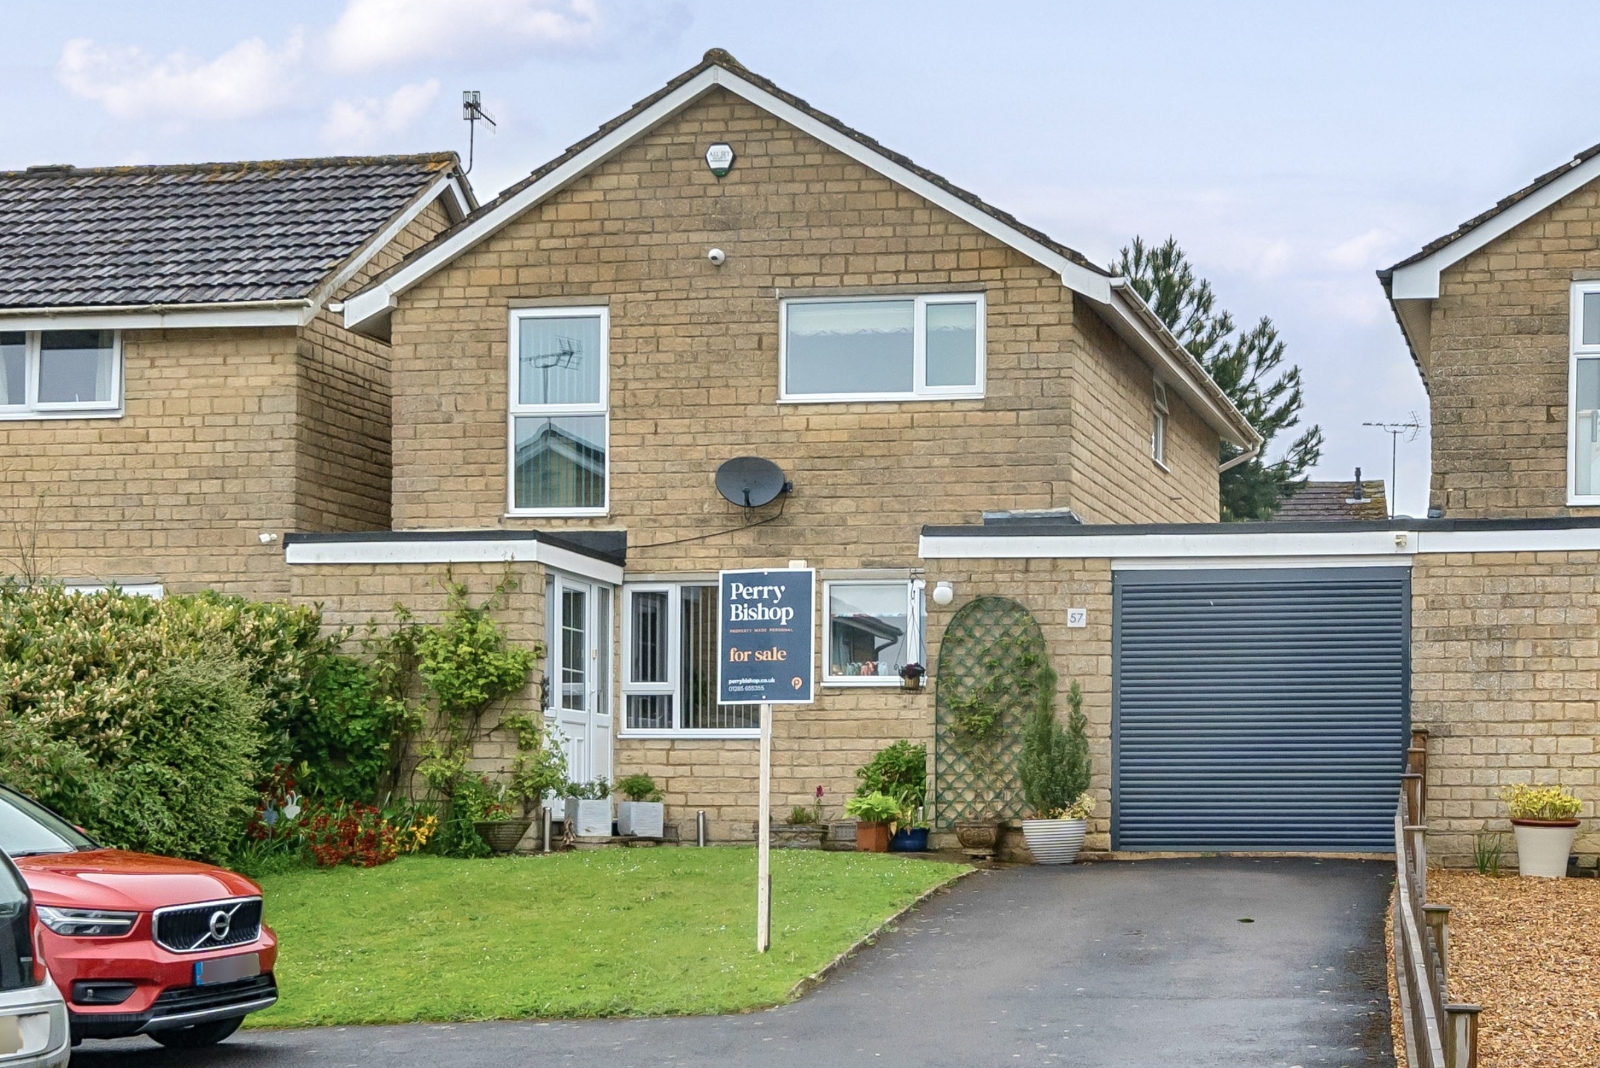 Stratton Heights, Cirencester, Cotswold, GL7